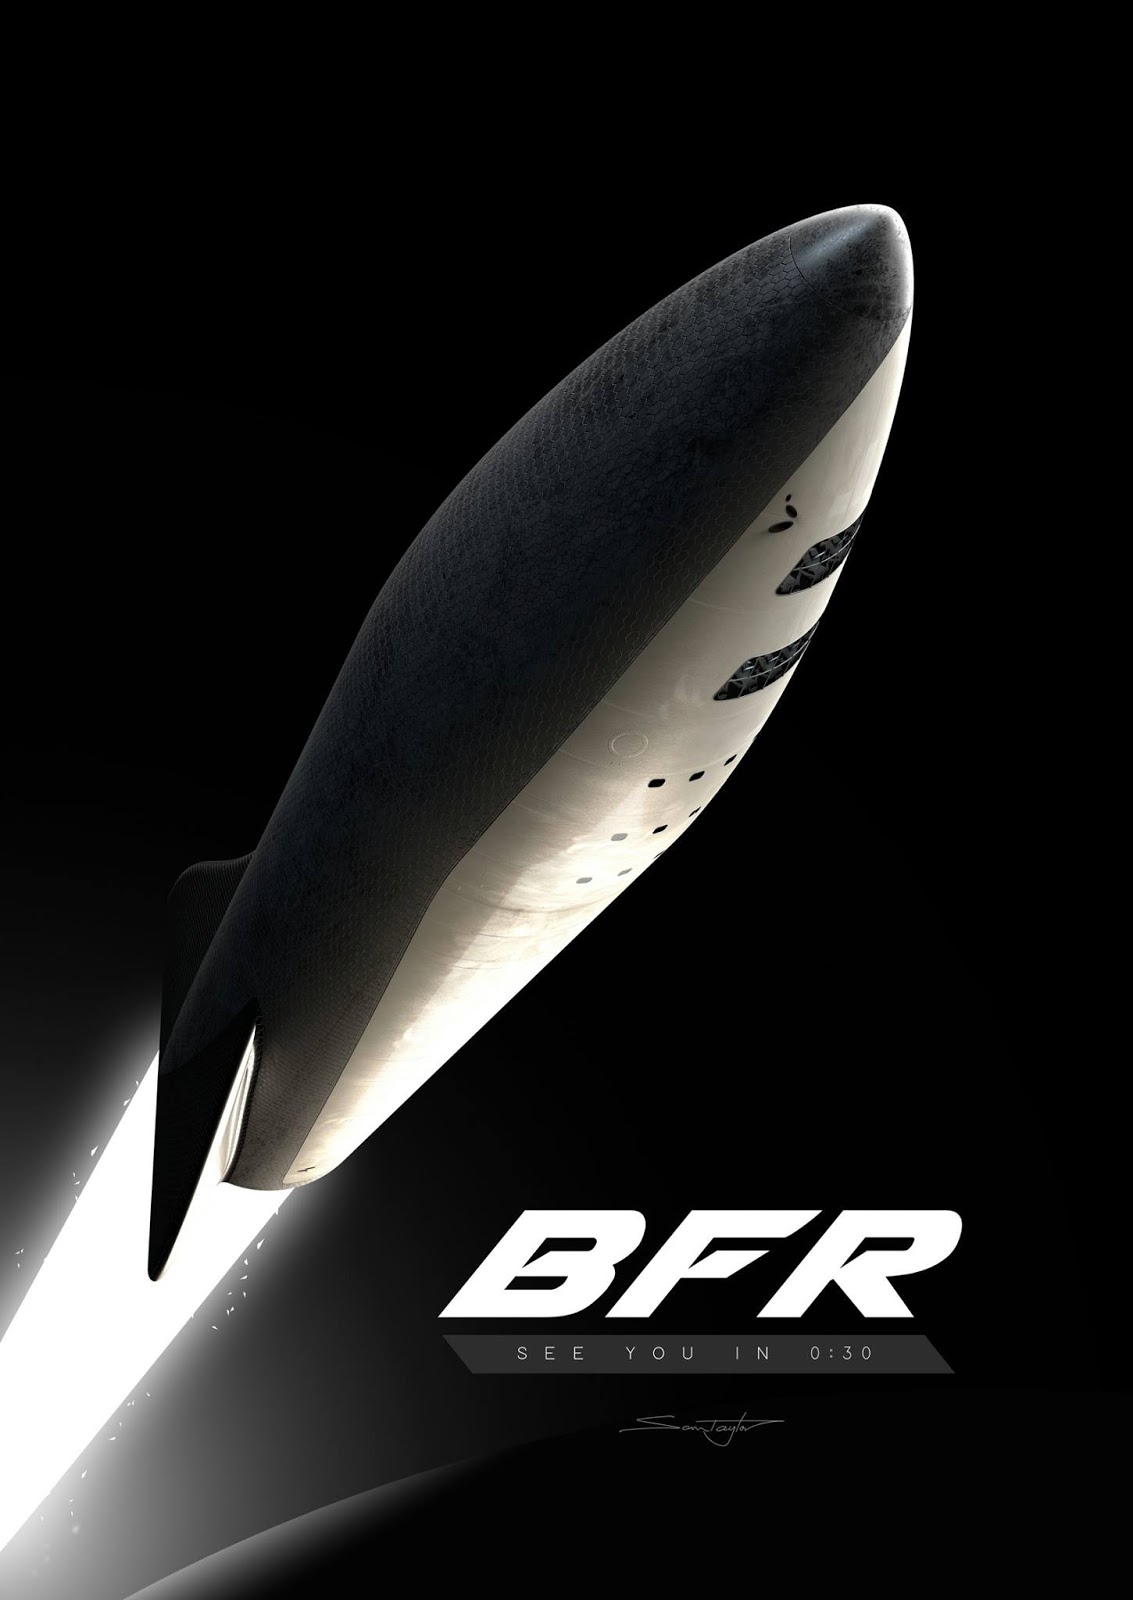 Poster with SpaceX BFR spaceship by Sam Taylor